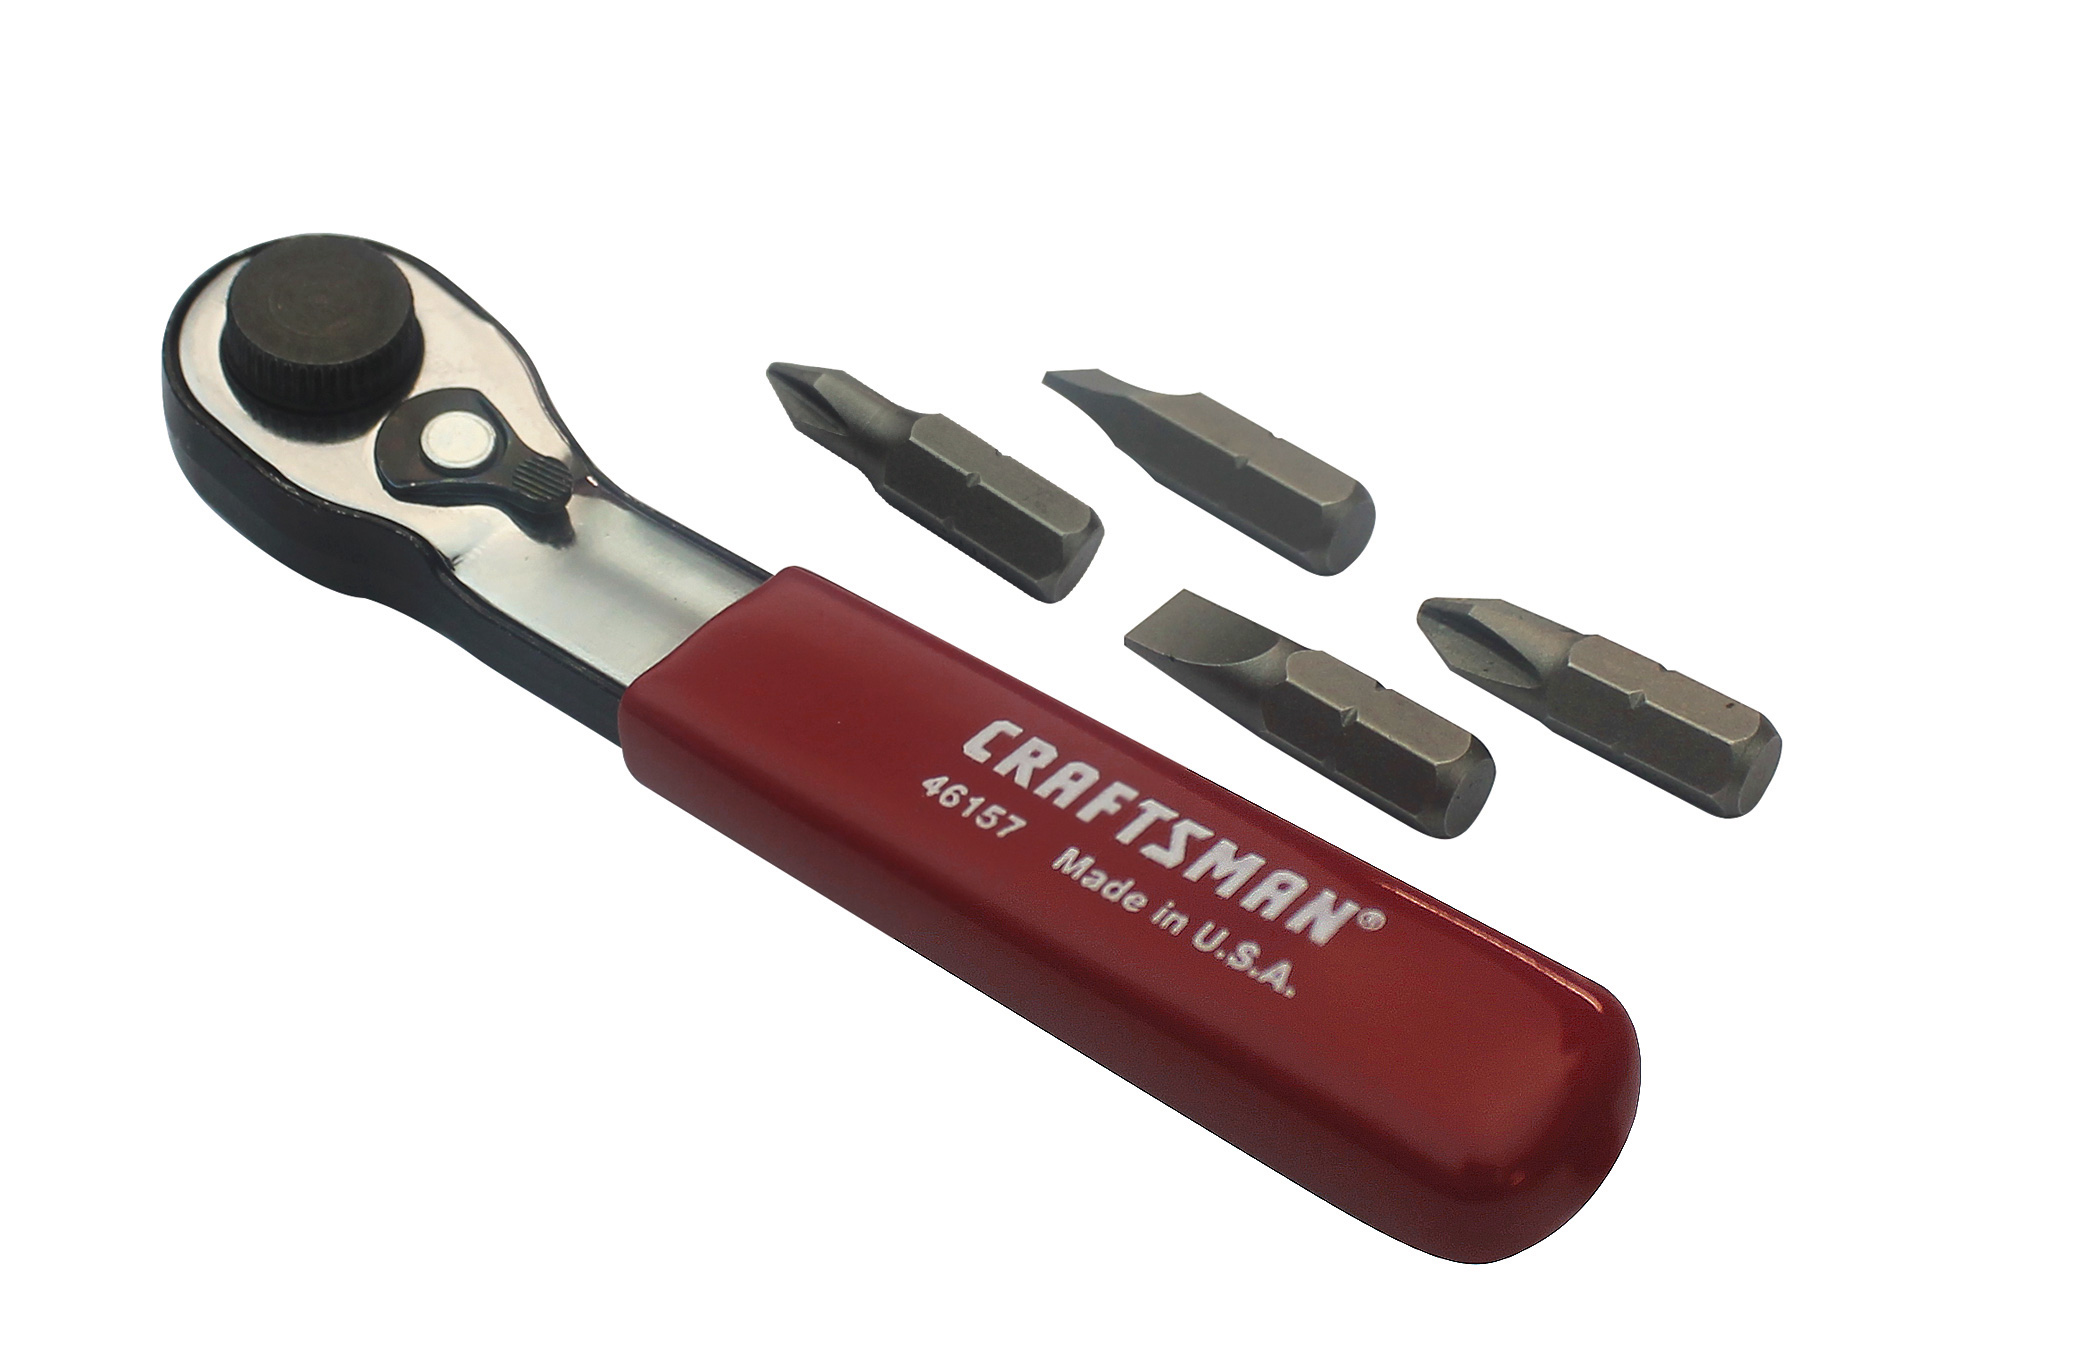 craftsman tools sold by sears is an example of